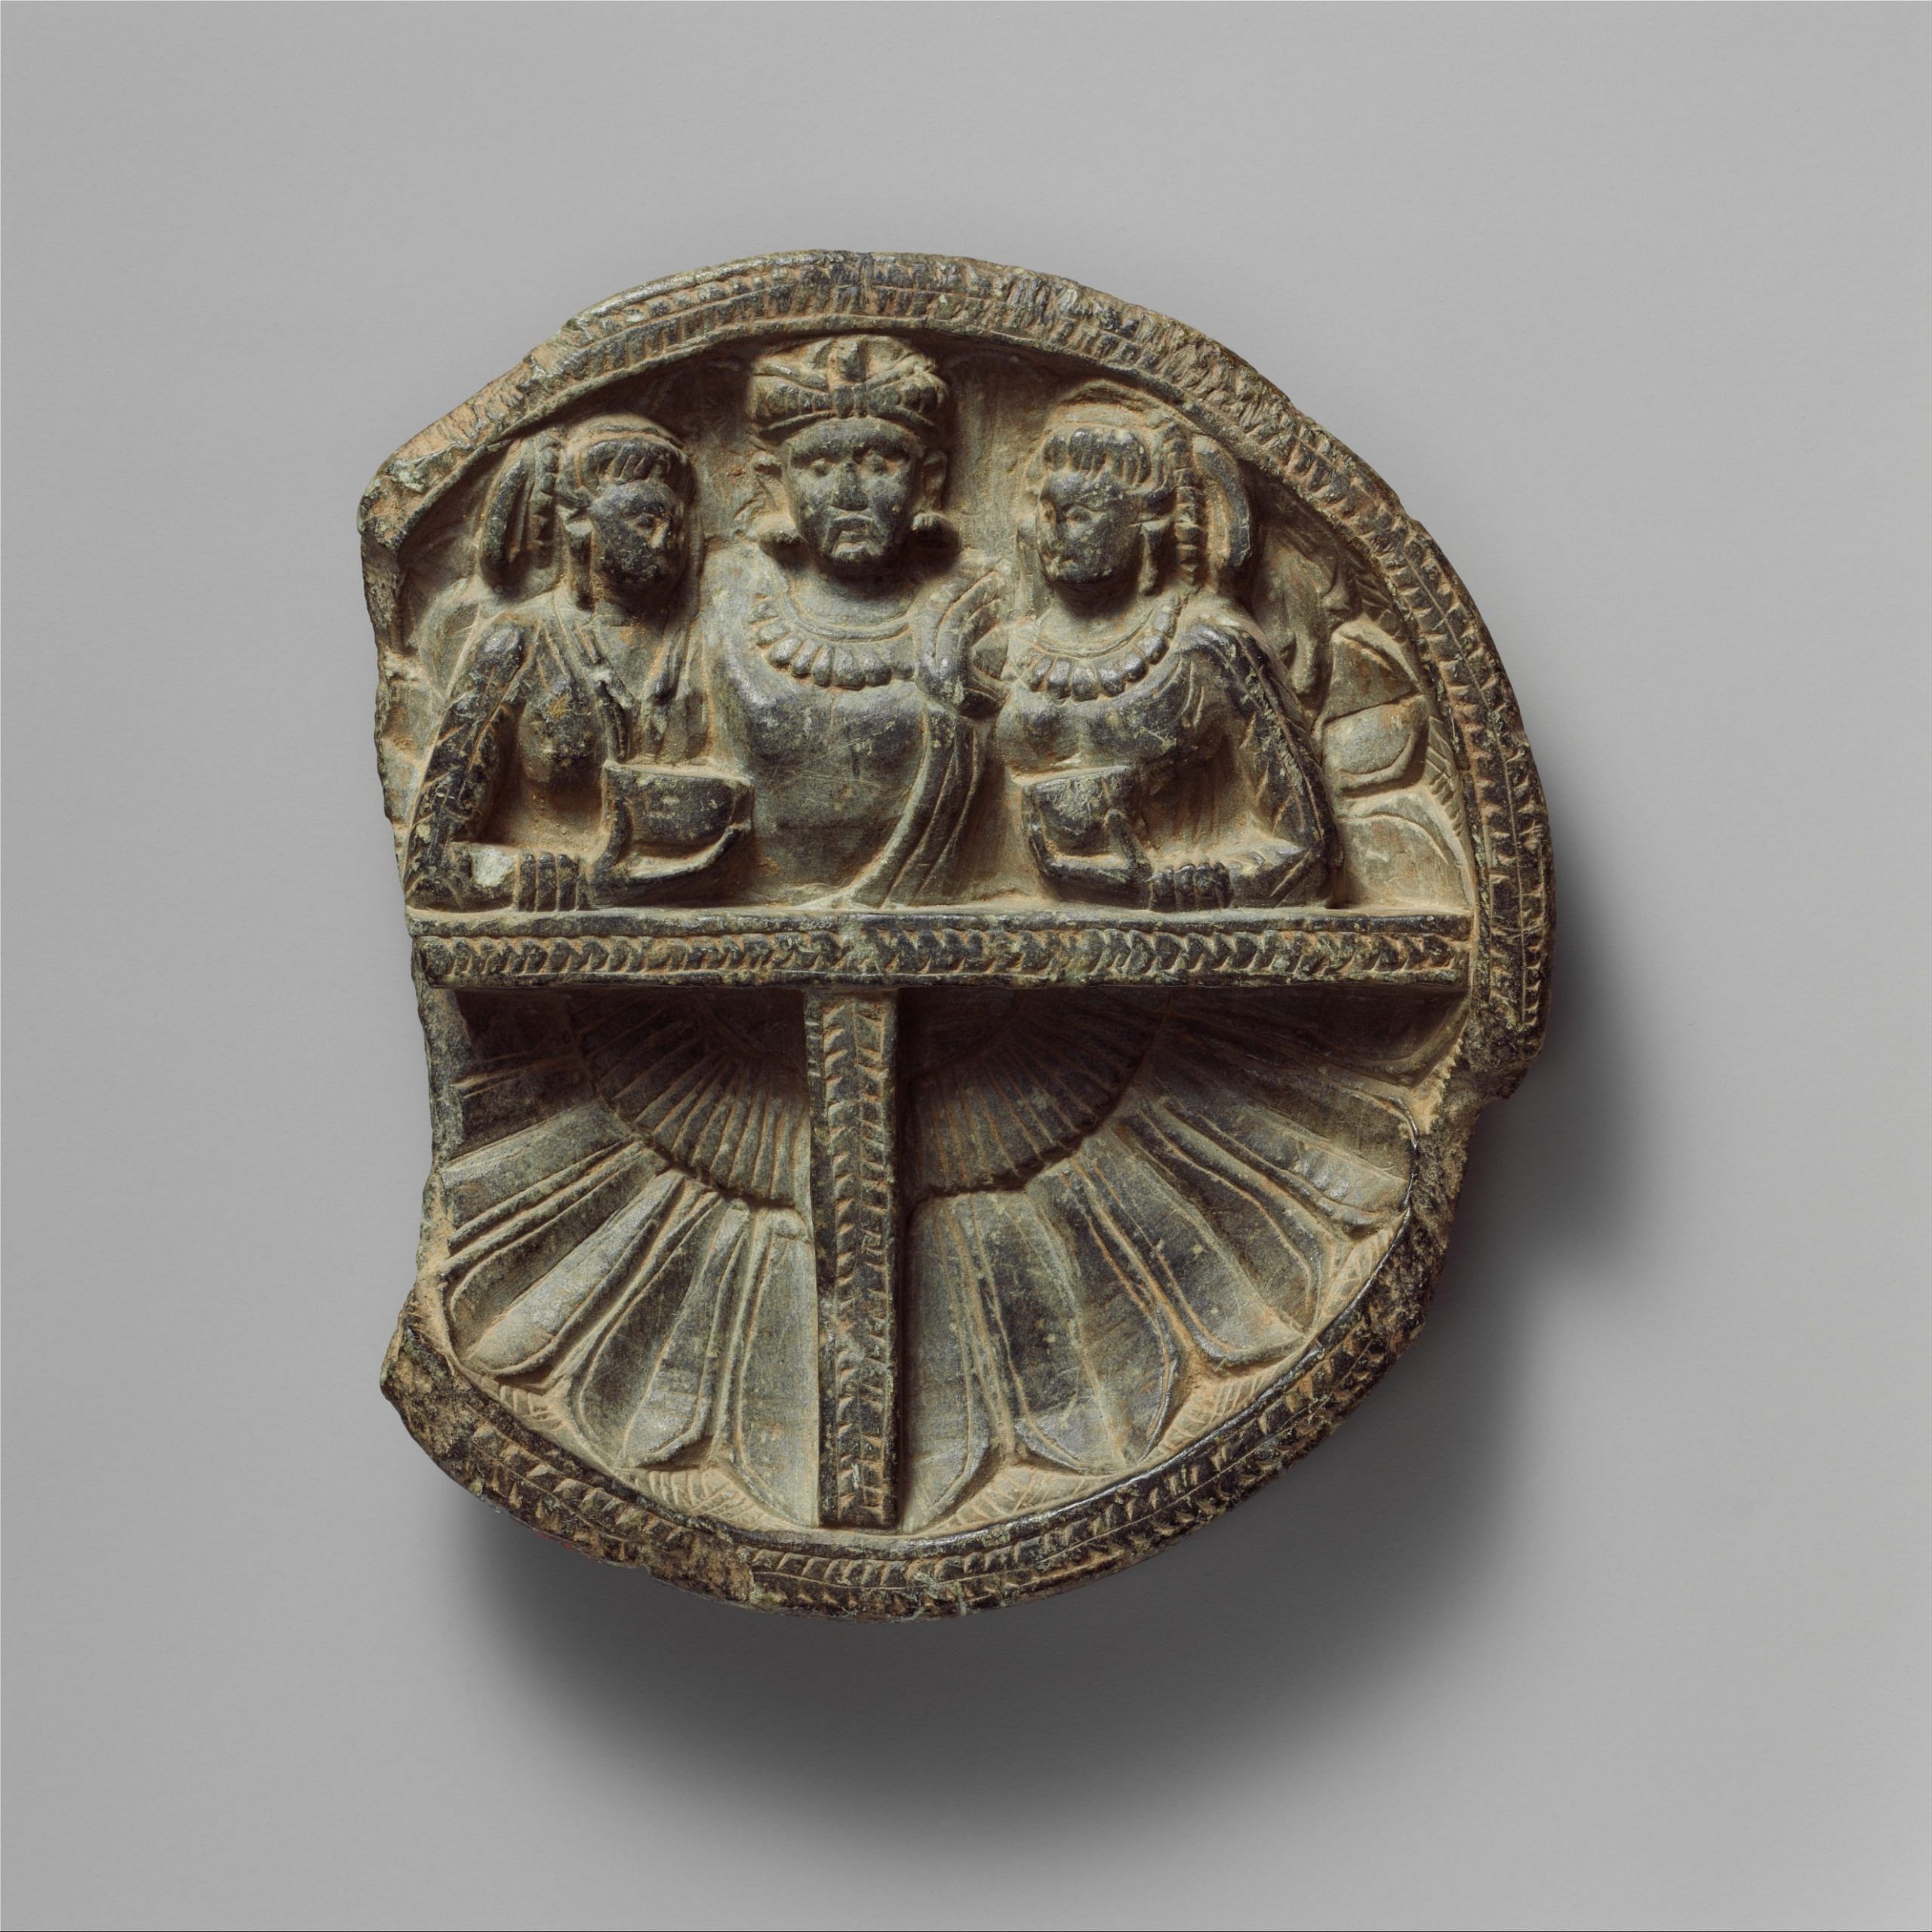 carved stone dishes from gandhara – make-up trays or ritual objects?